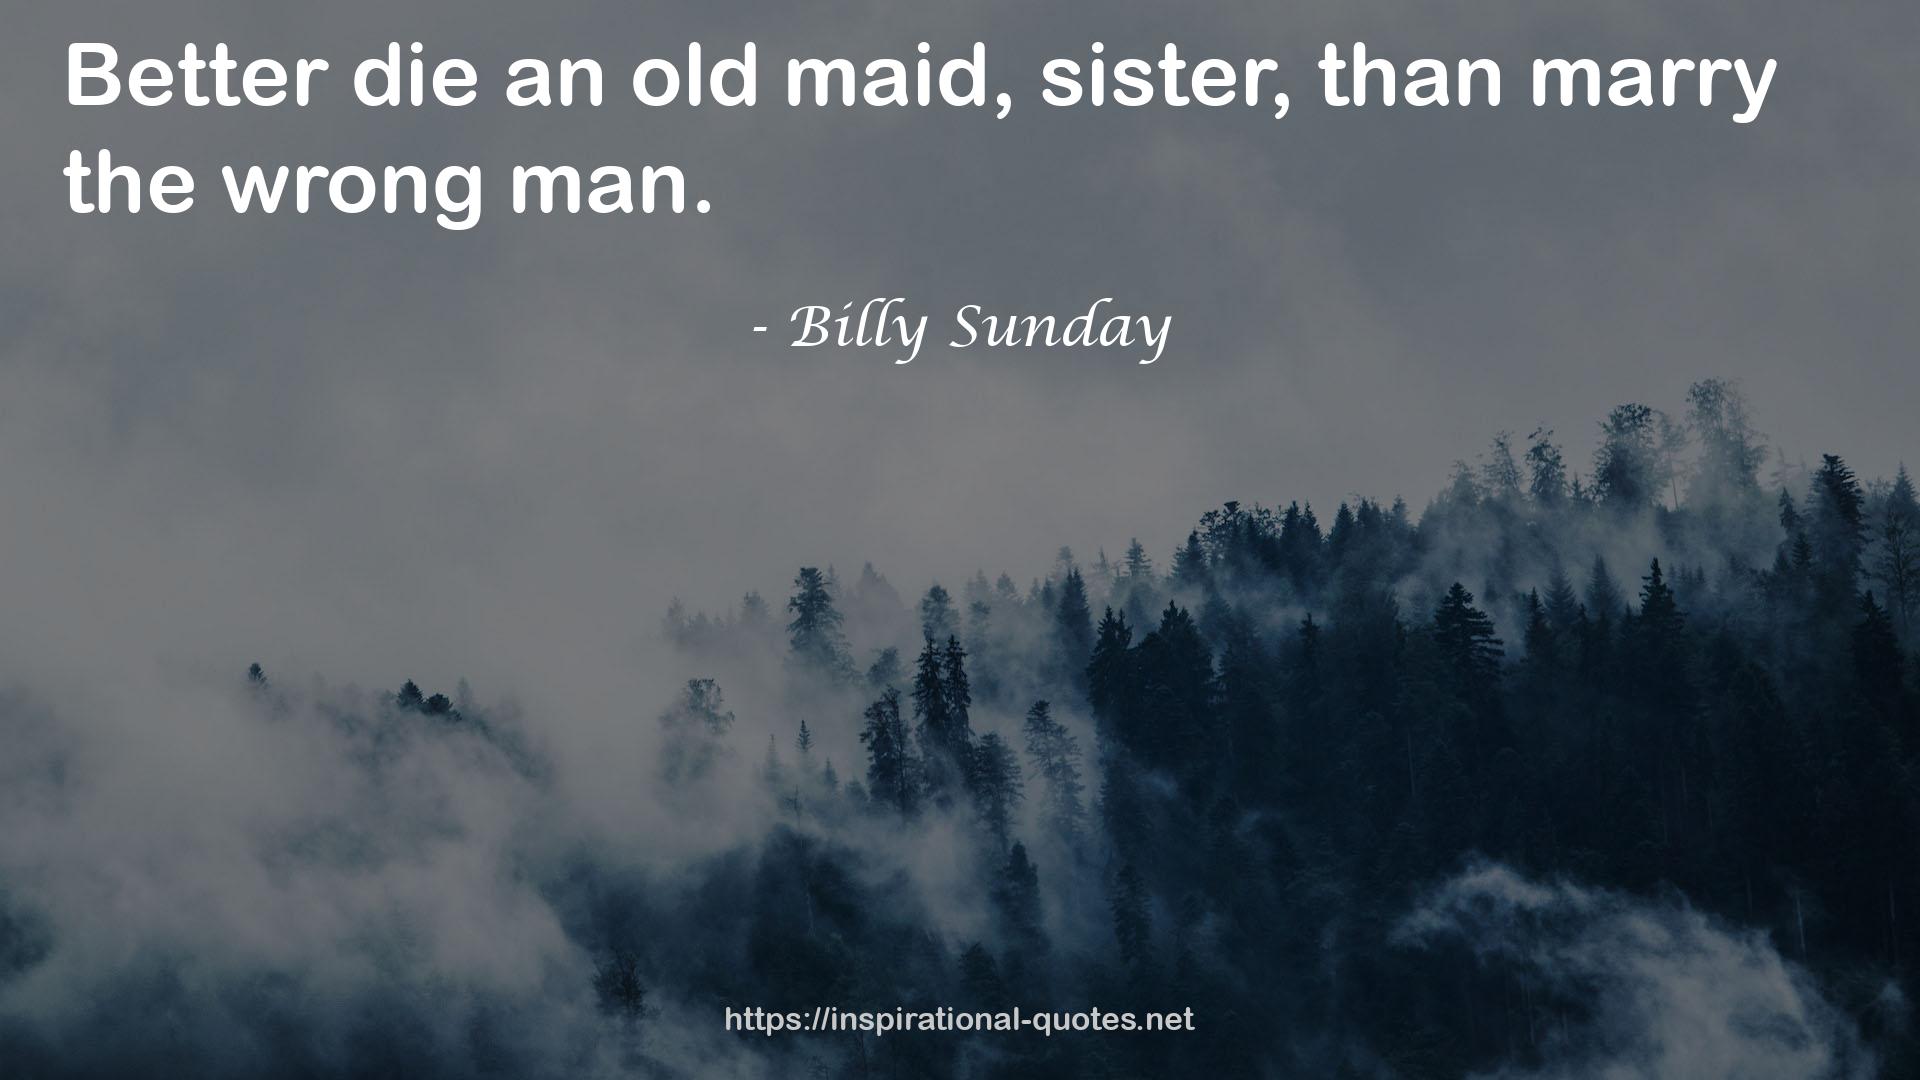 Billy Sunday QUOTES